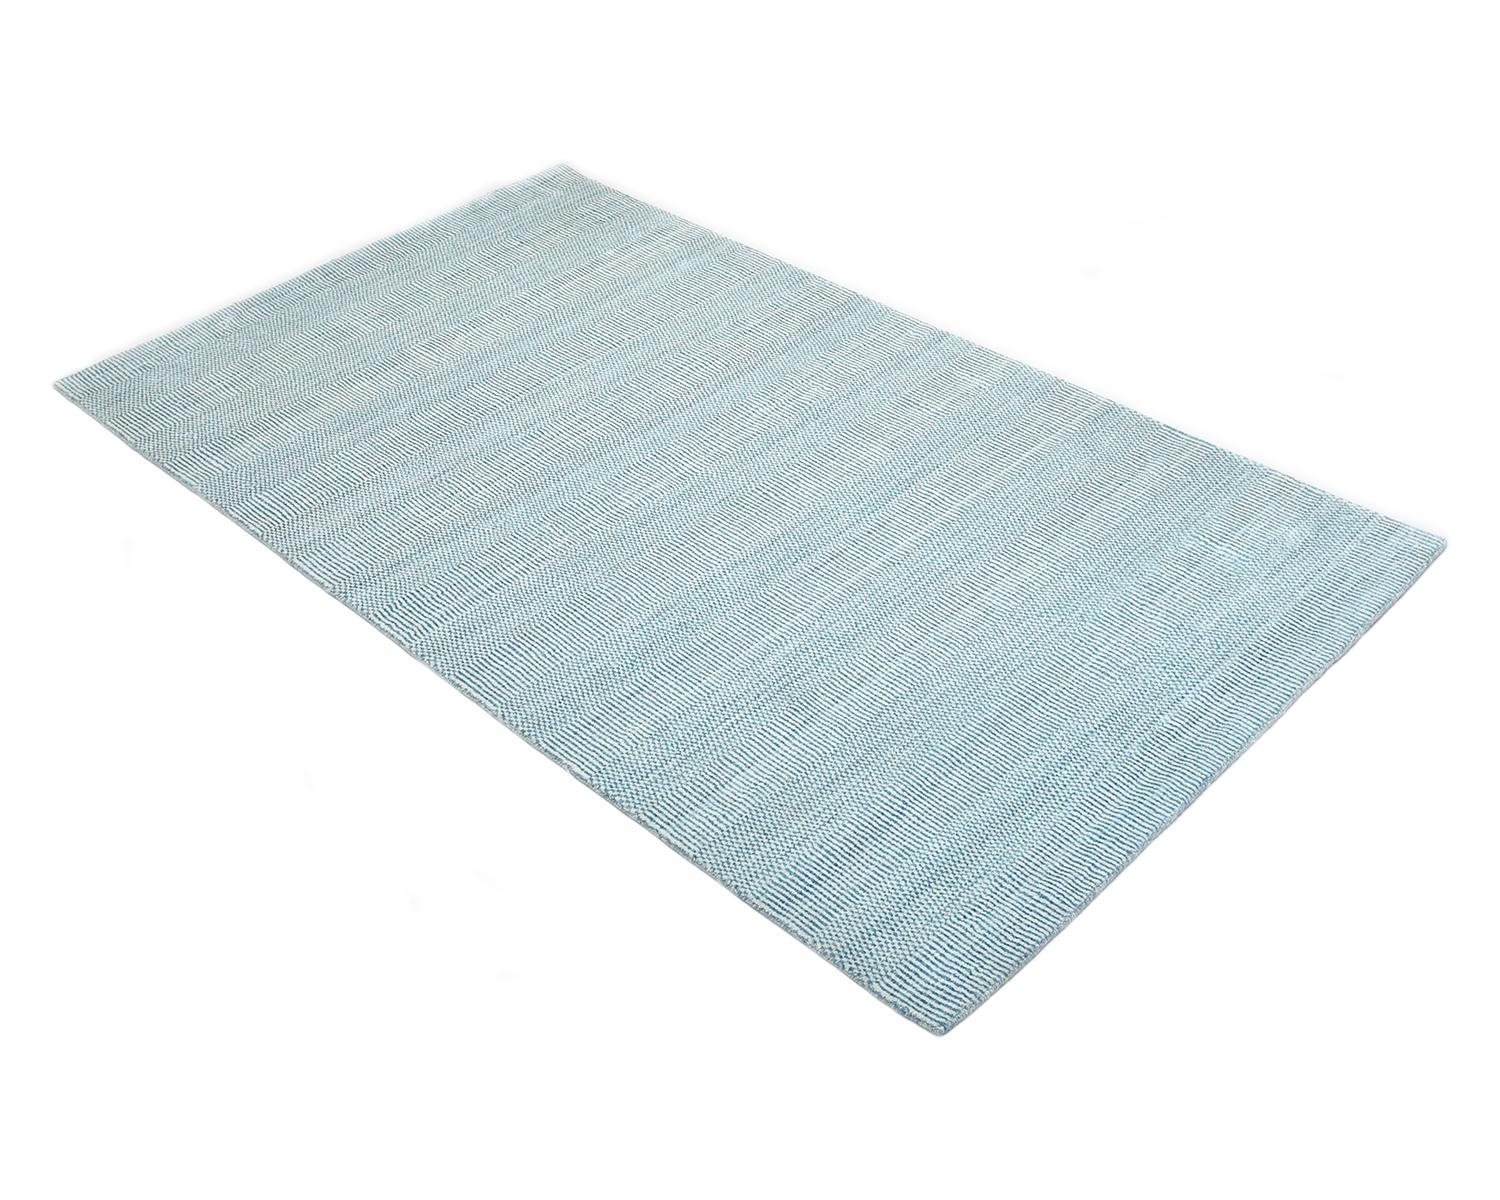 Hand-Woven Reese, Contemporary Solid Handwoven Area Rug, Aqua